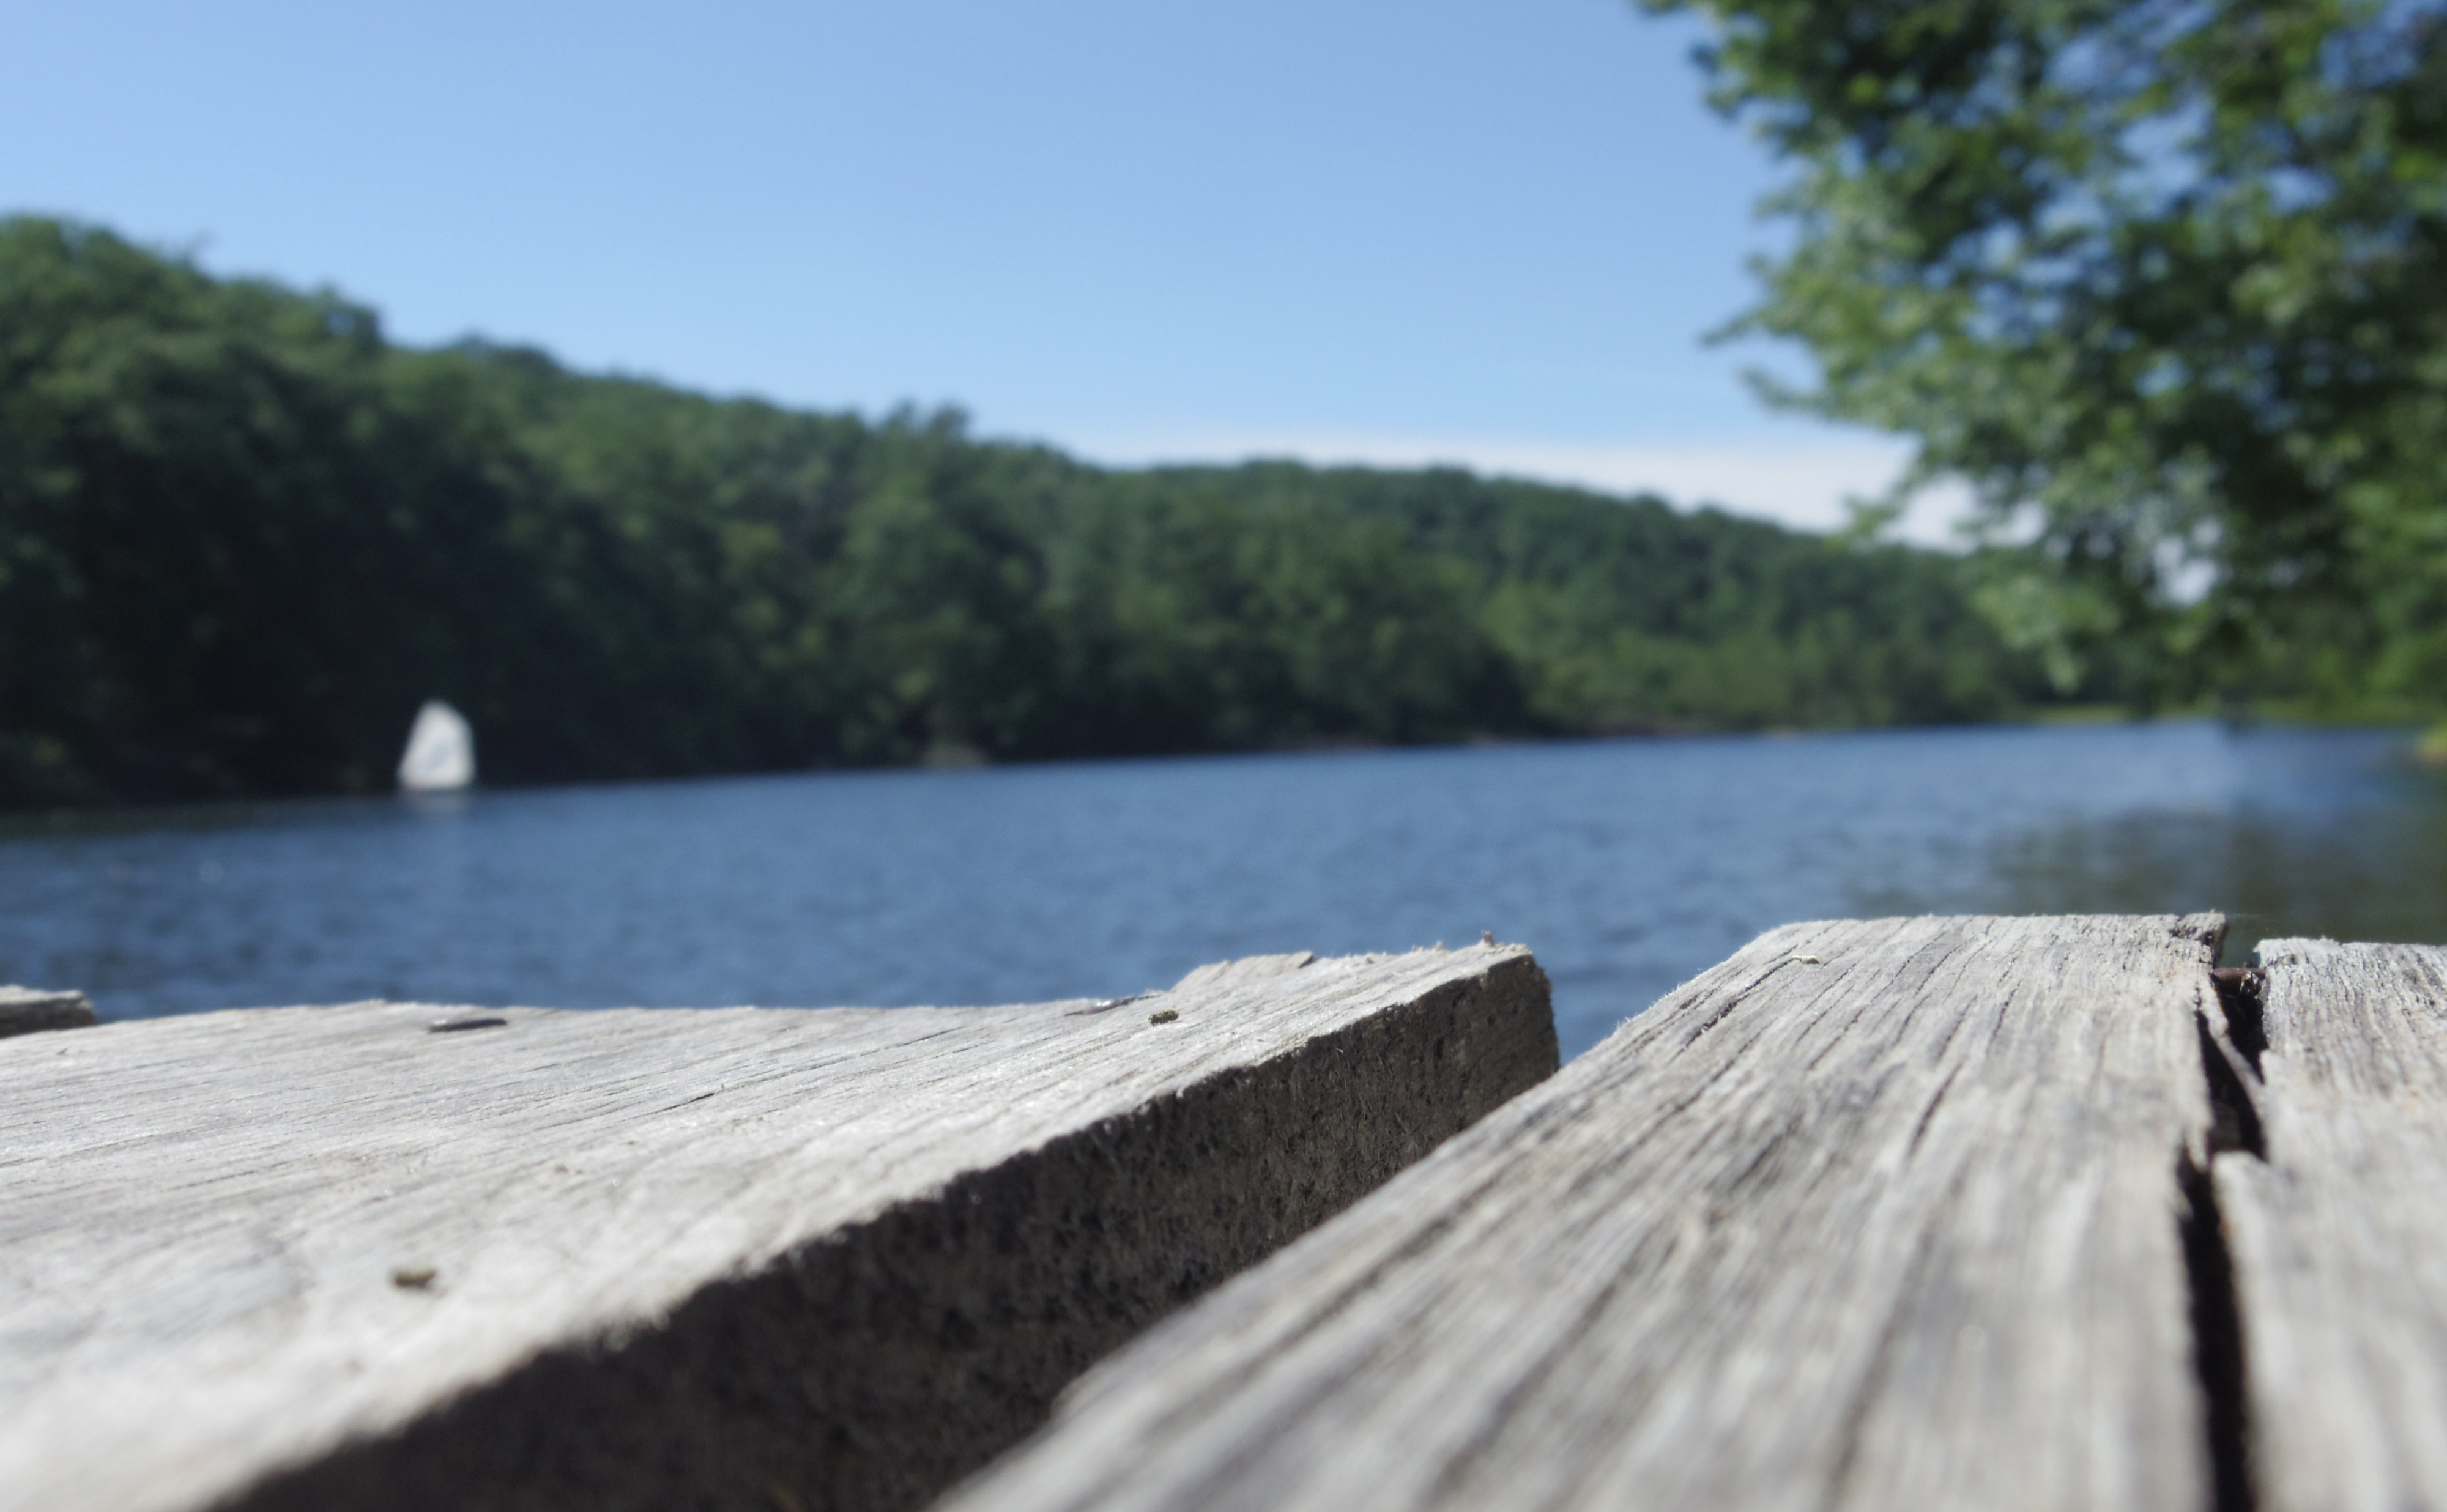 File:Edge of wooden dock by lake in Tennessee.jpg - Wikimedia Commons